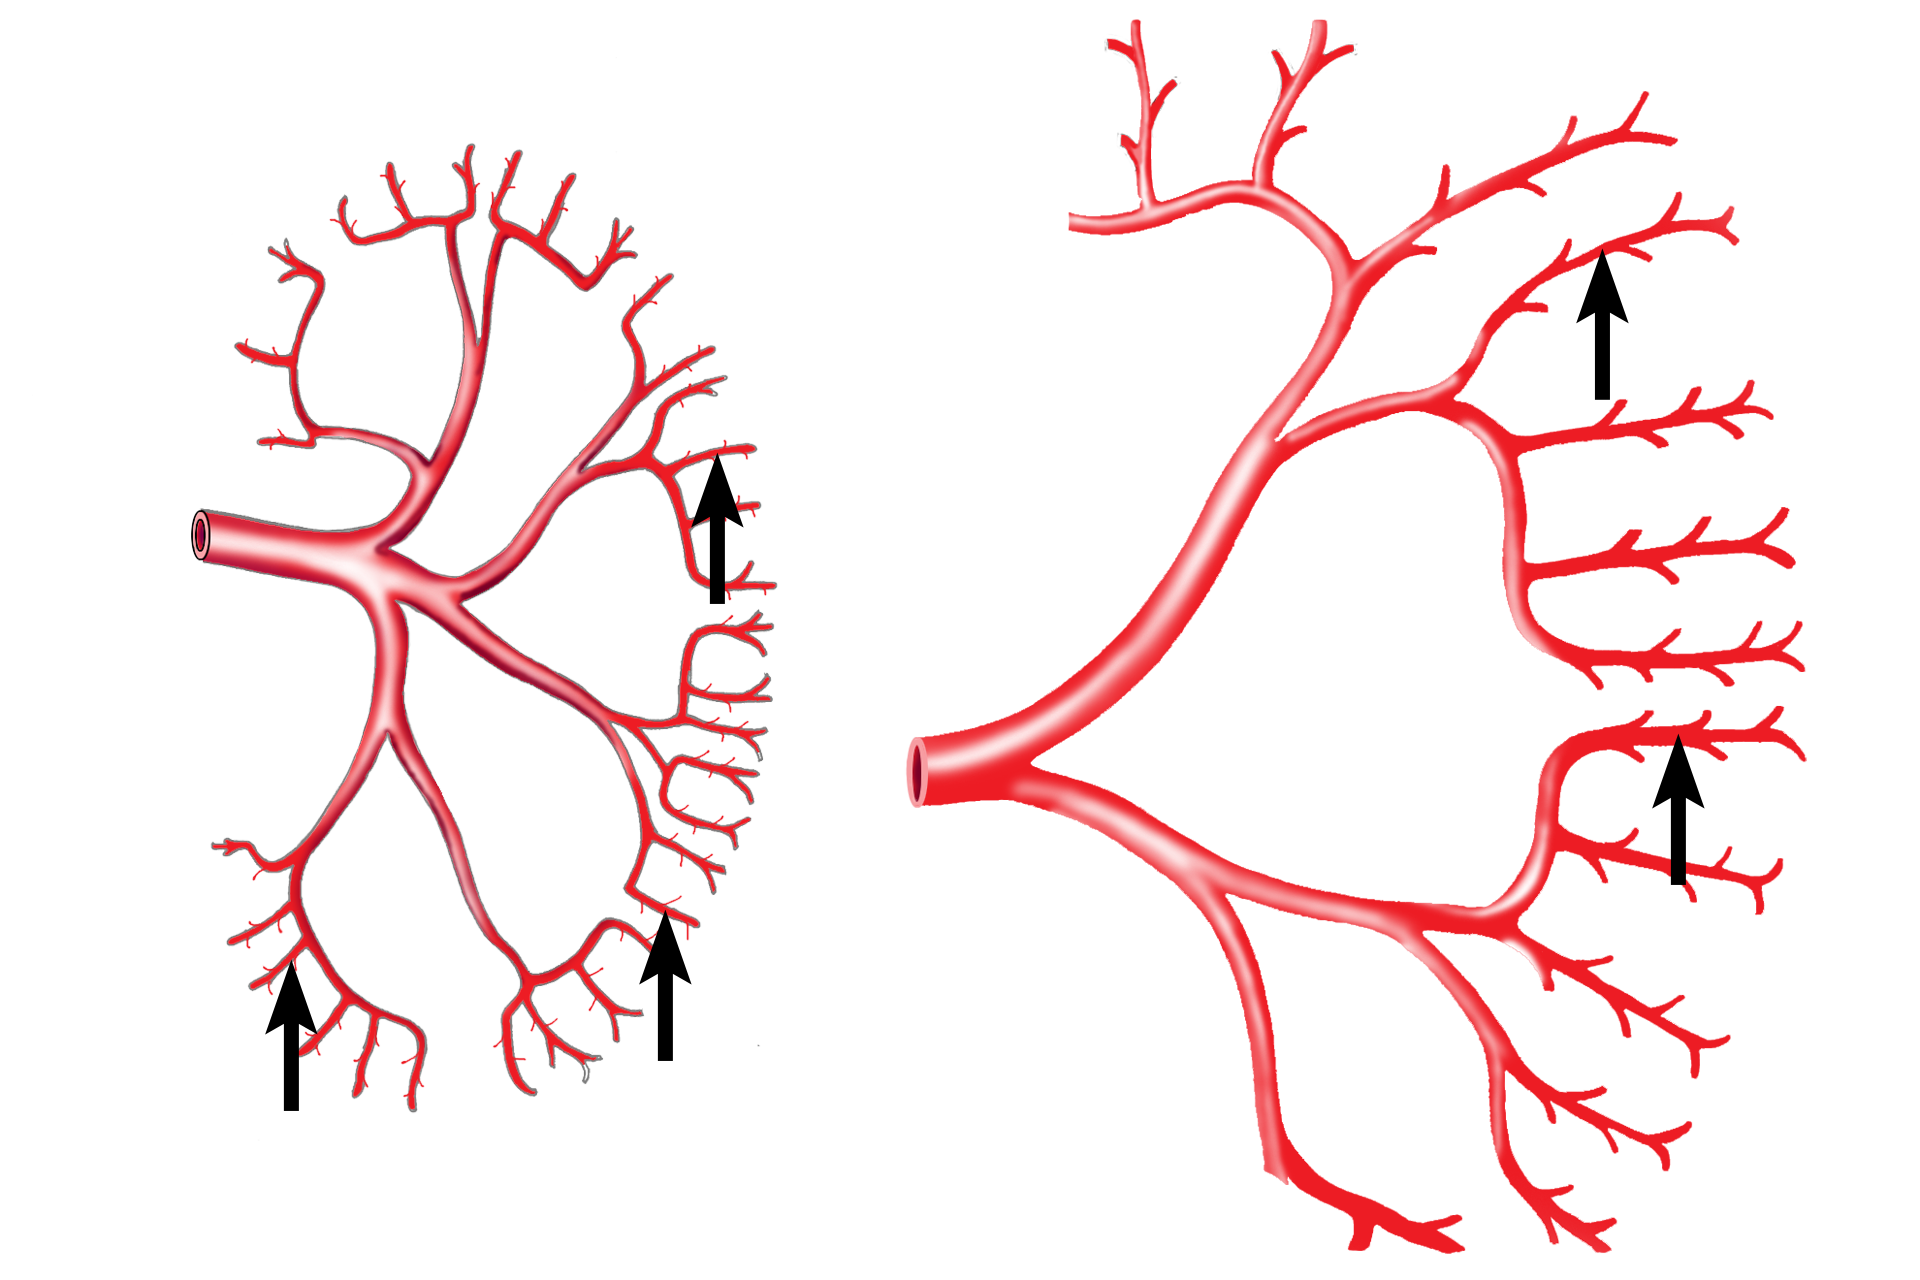  - Interlobular artery <p>When the renal artery enters the kidney, it branches into interlobar arteries, which travel between the pyramids through the renal columns. These arteries branch laterally to form the arcuate vessels that mark the boundary between cortex and medulla. Interlobular arteries leave the arcuates to enter the convoluted portions of the cortex.</p>
